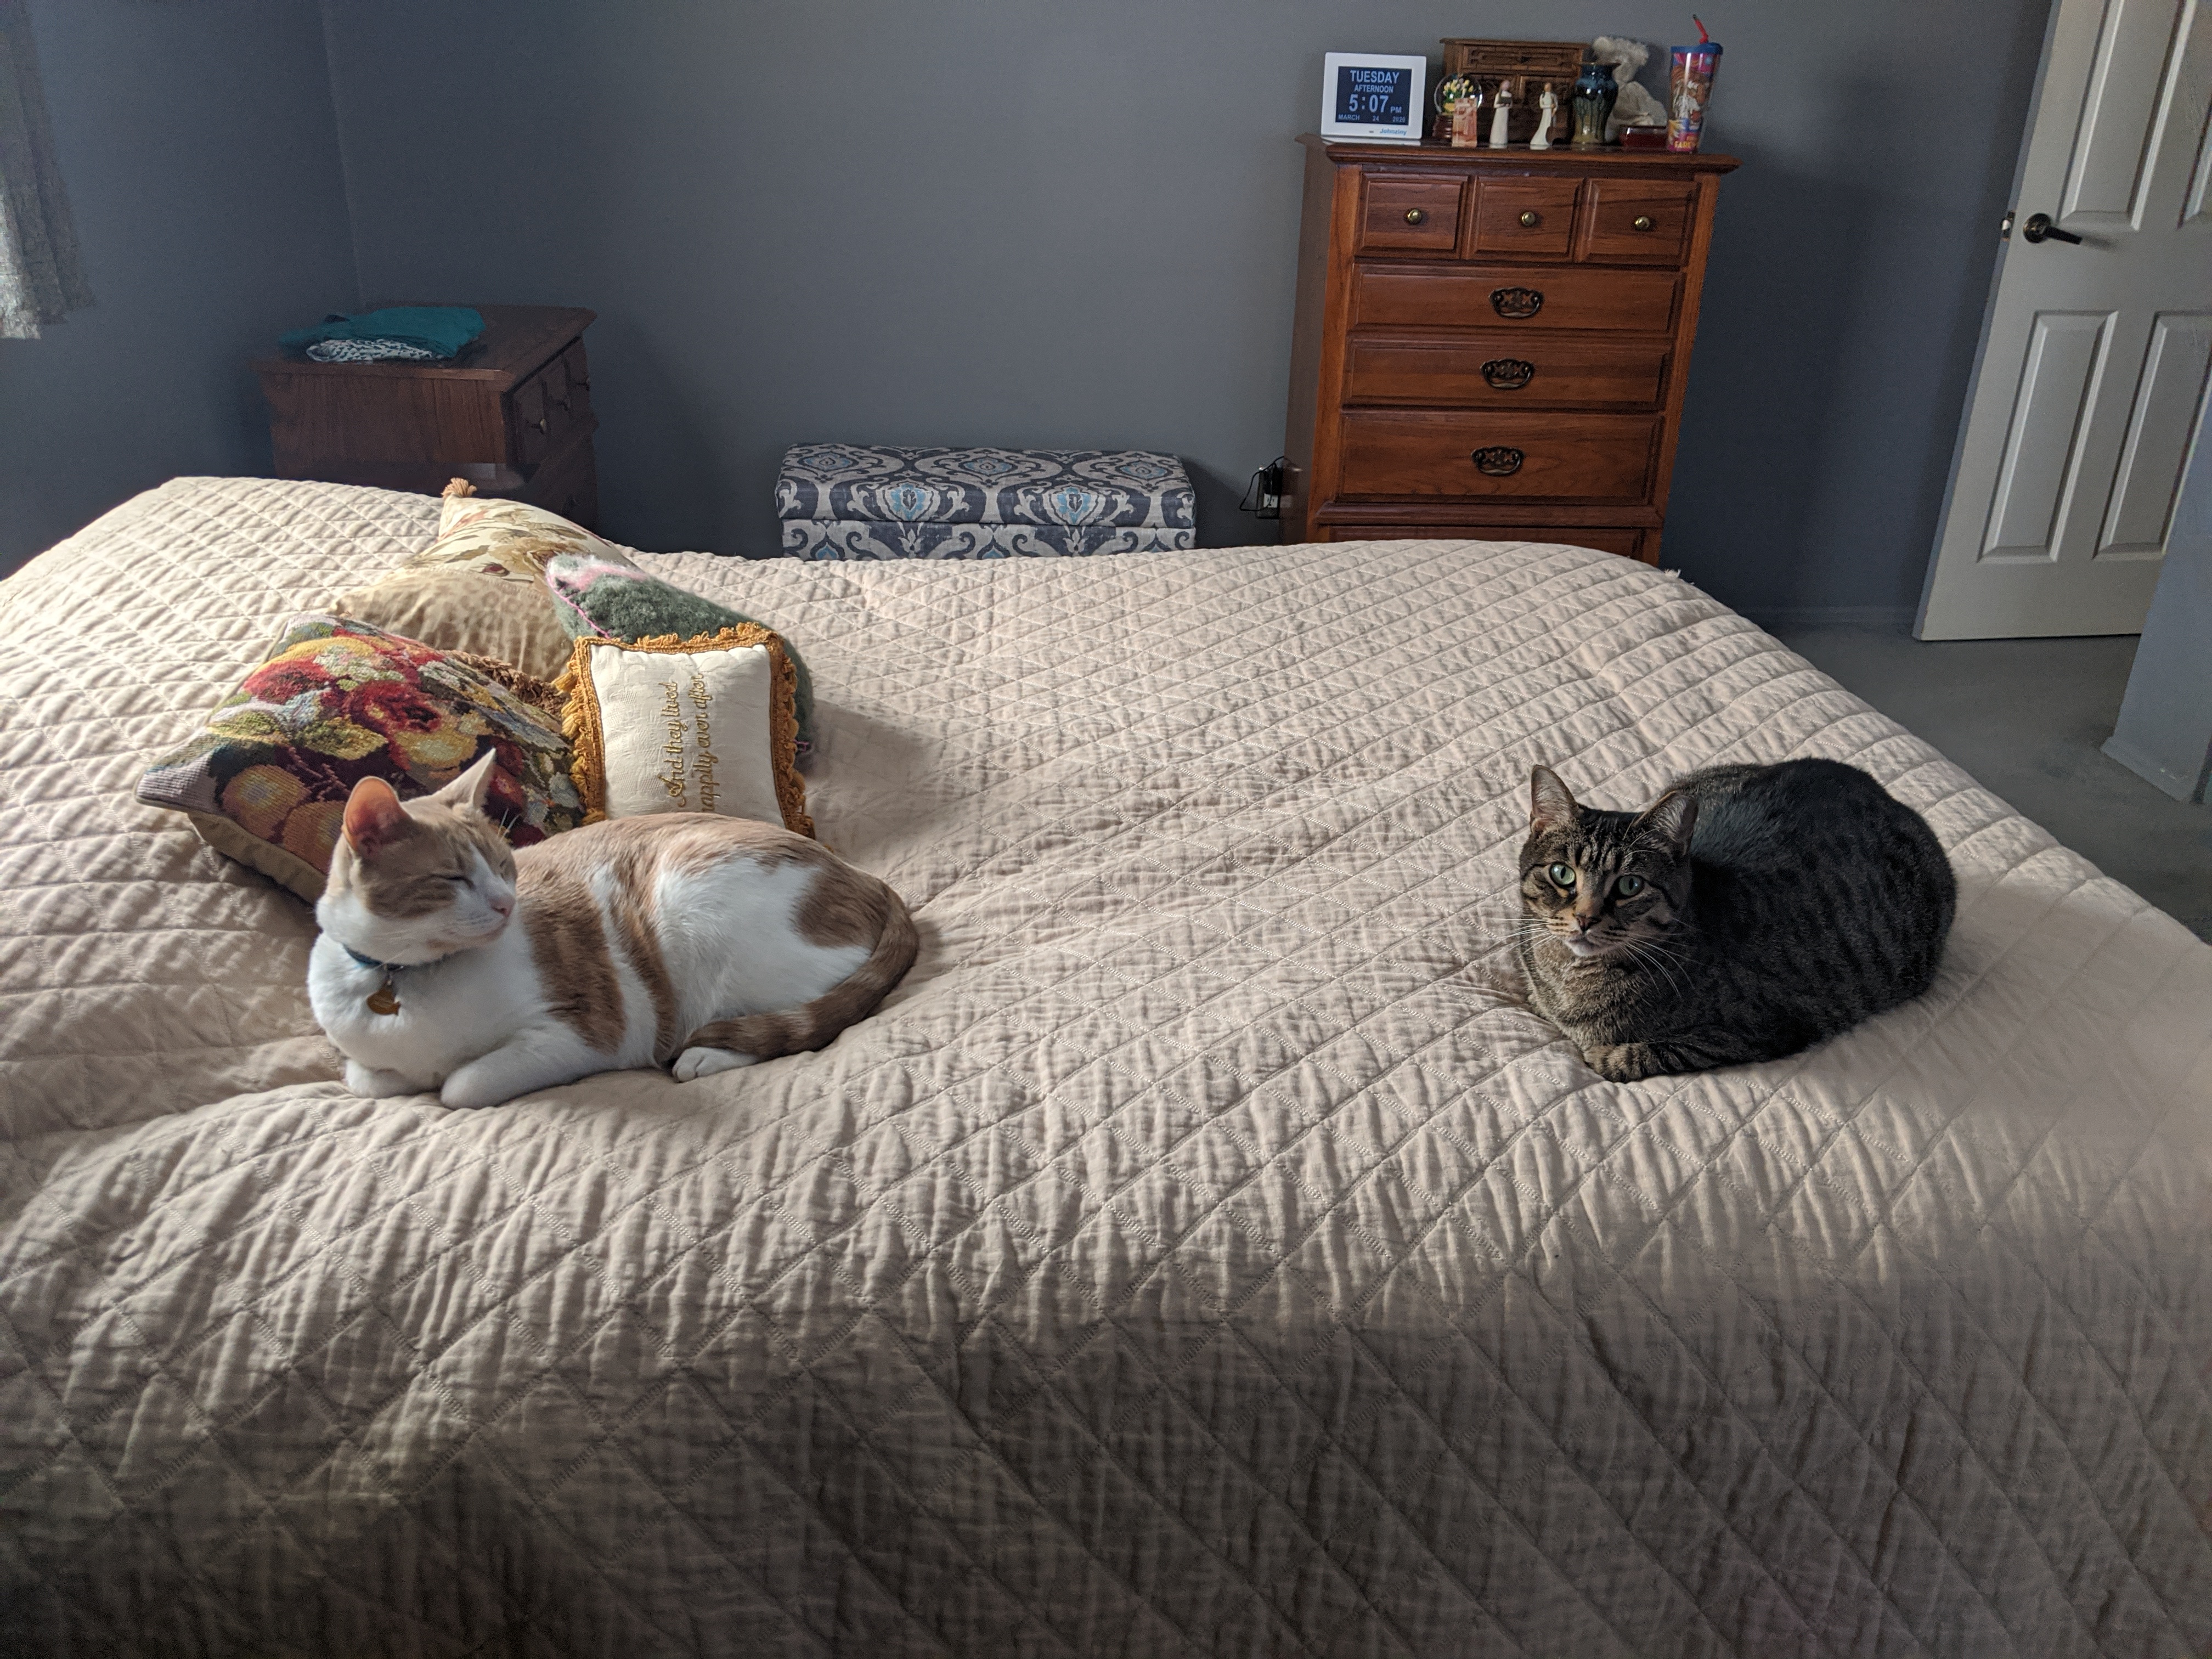 Duncan and Barry on bed.jpg